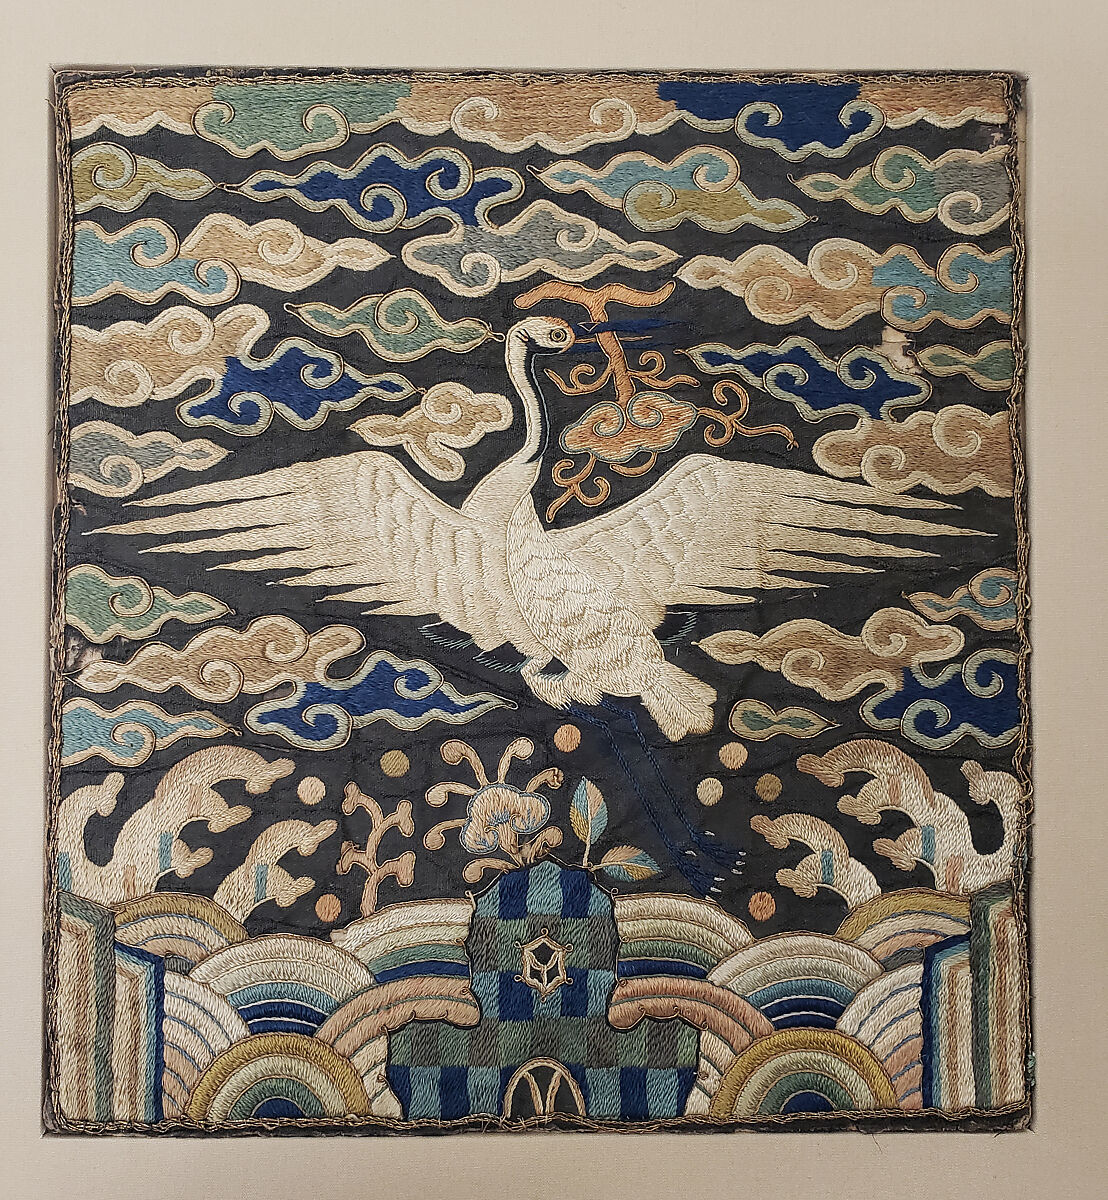 Rank badge with a crane (one of a pair), Silk and metallic-thread embroidery on silk satin damask, Korea 